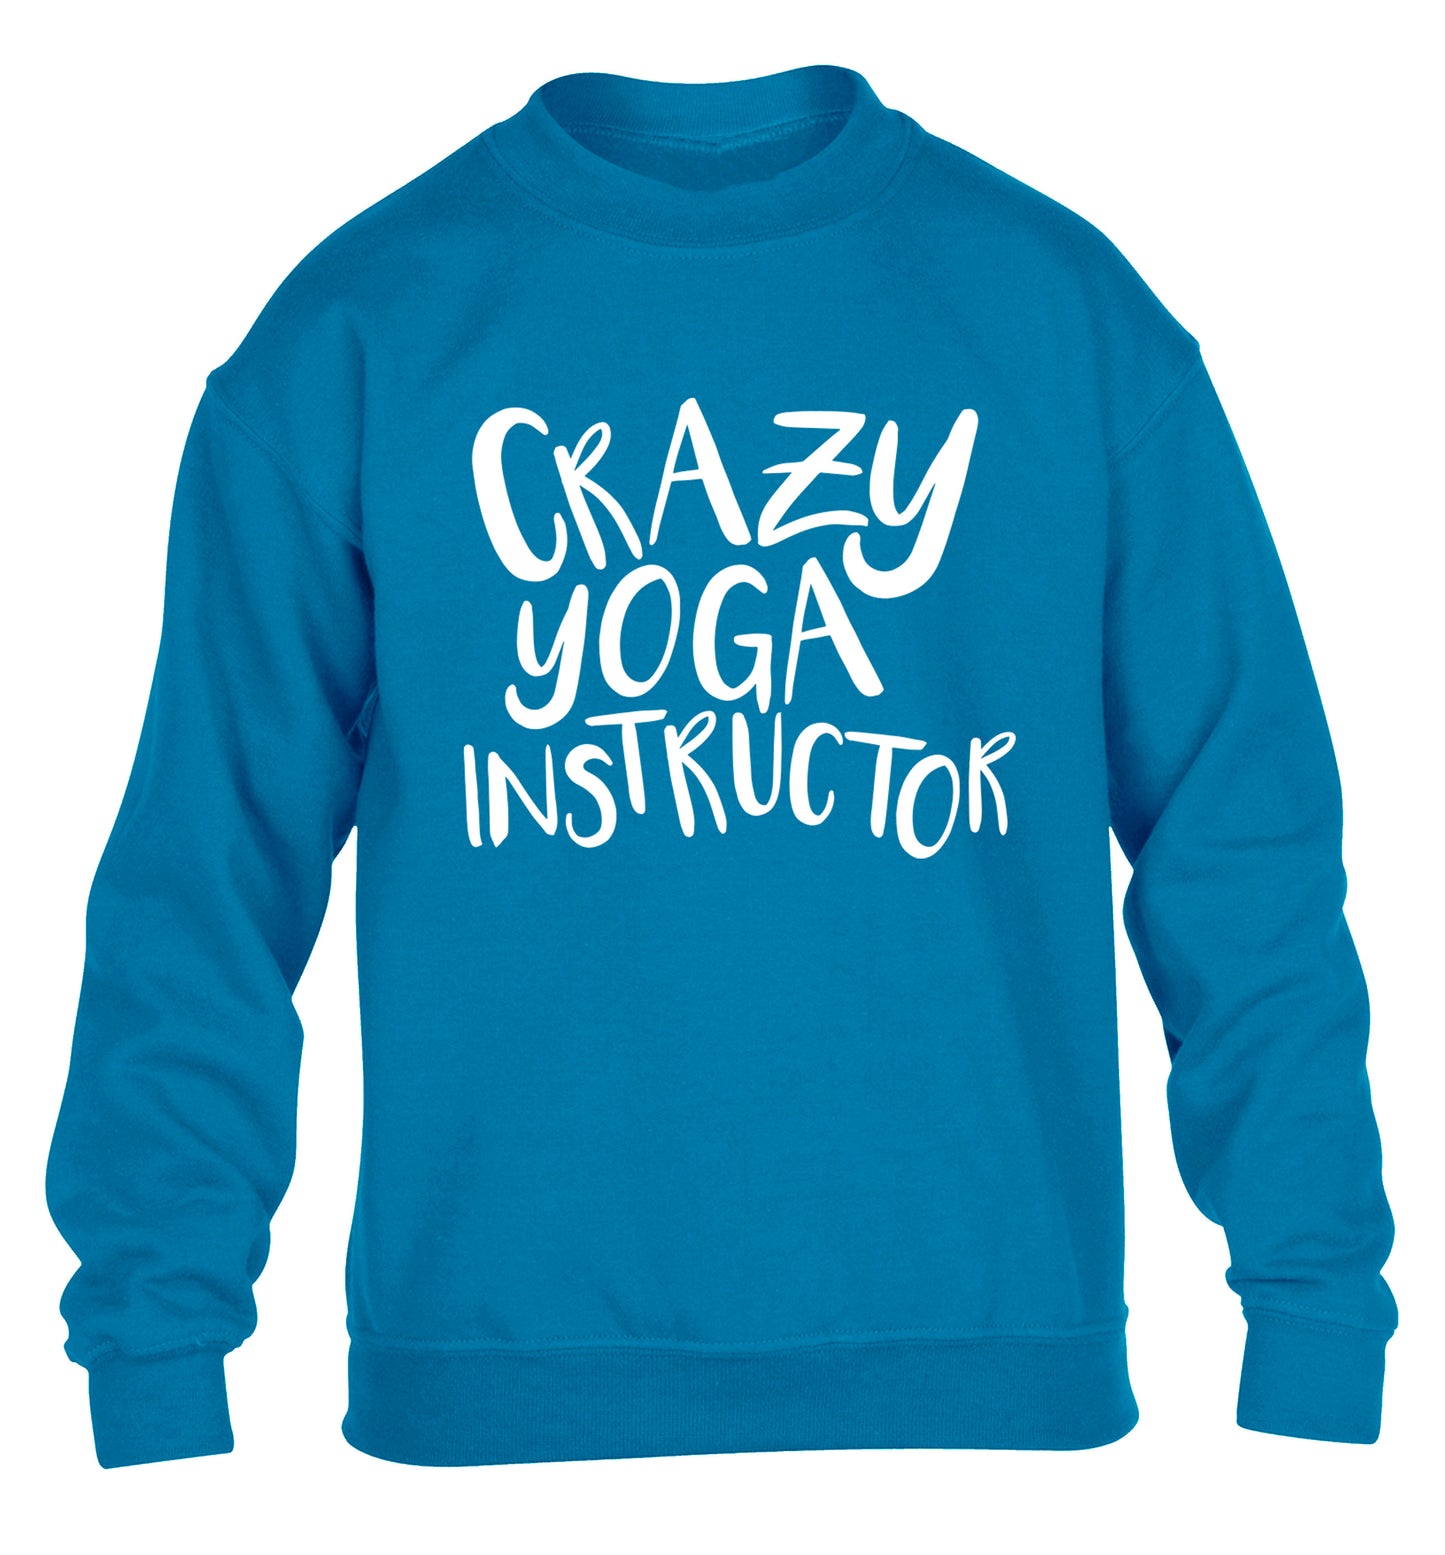 Crazy yoga instructor children's blue sweater 12-13 Years